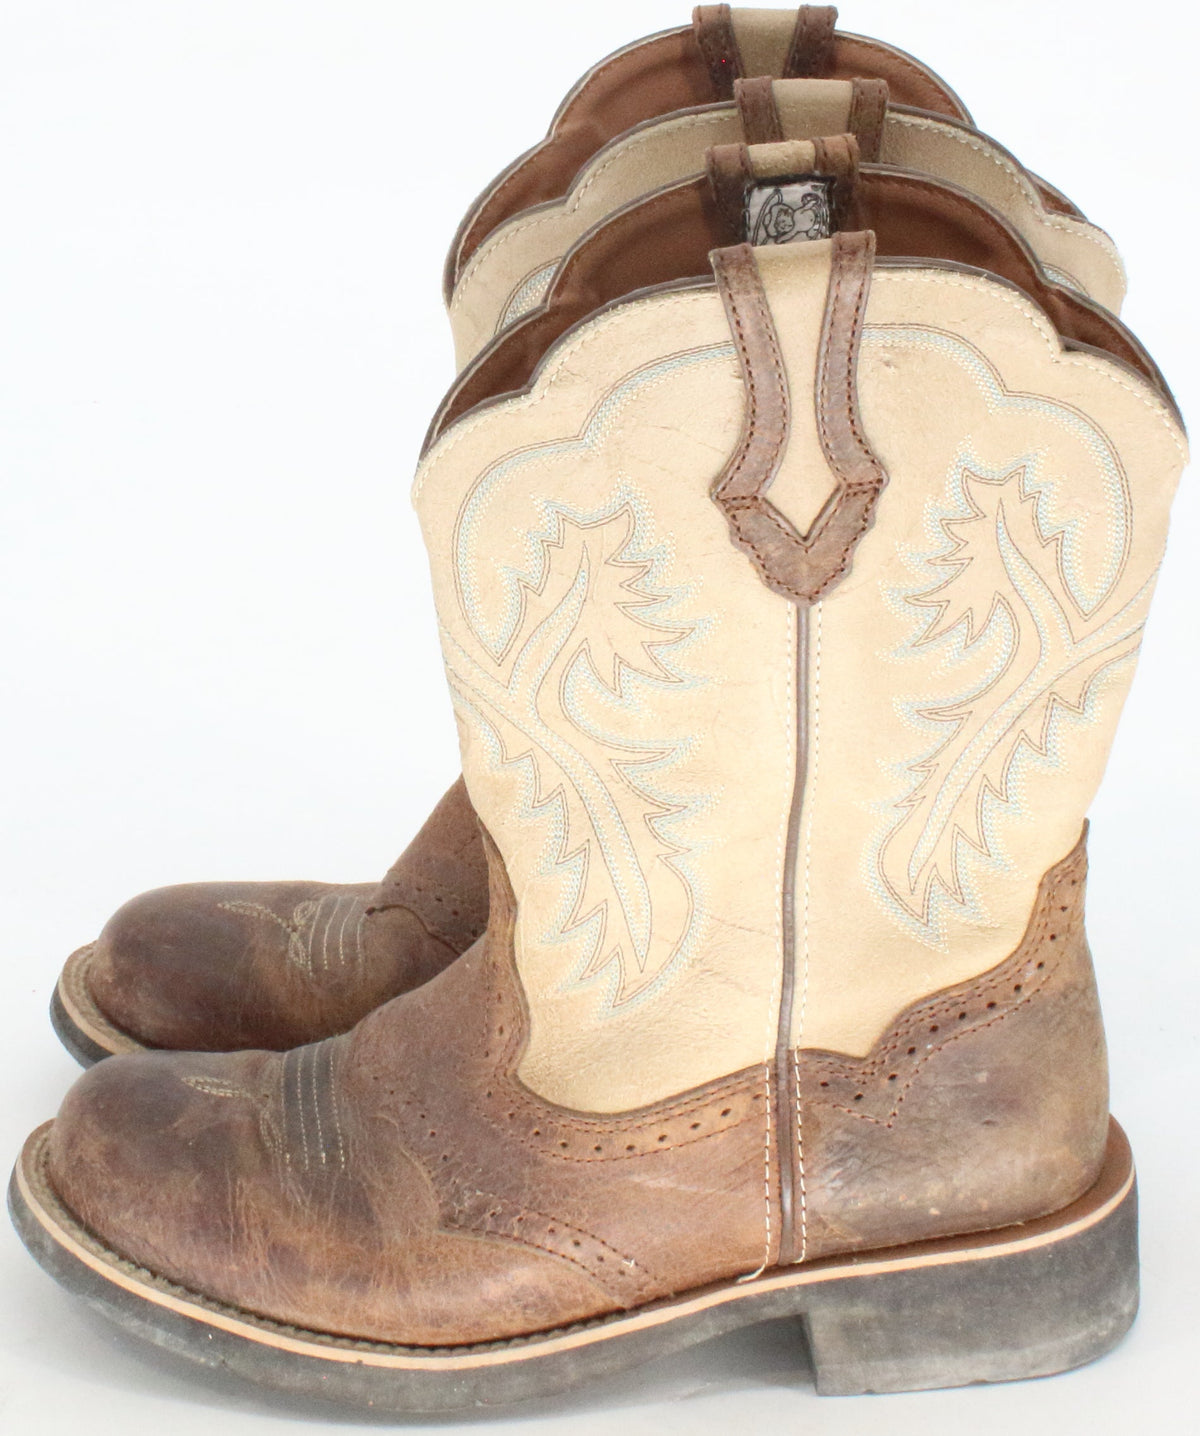 Ariat Fatbaby The Ariat Original Brown and Beige Western Boots